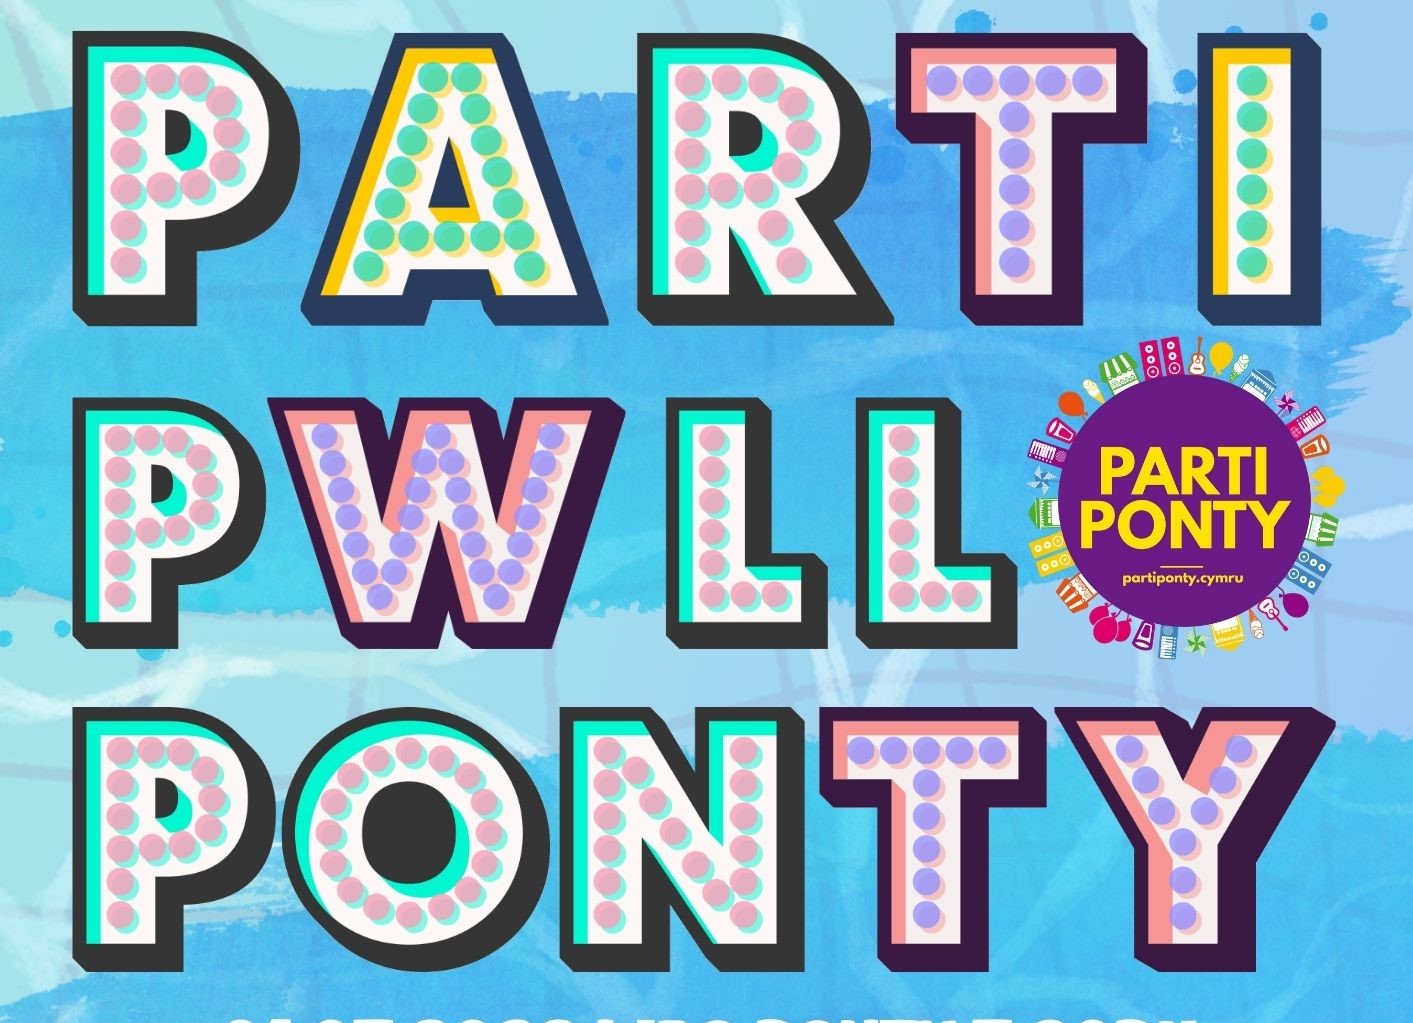 A cropped event poster with the words PARTY; PWLL; PONTY, written in capital letters across three lines and the Parti Ponty logo and website address partiponty.cymru in a purple circle.